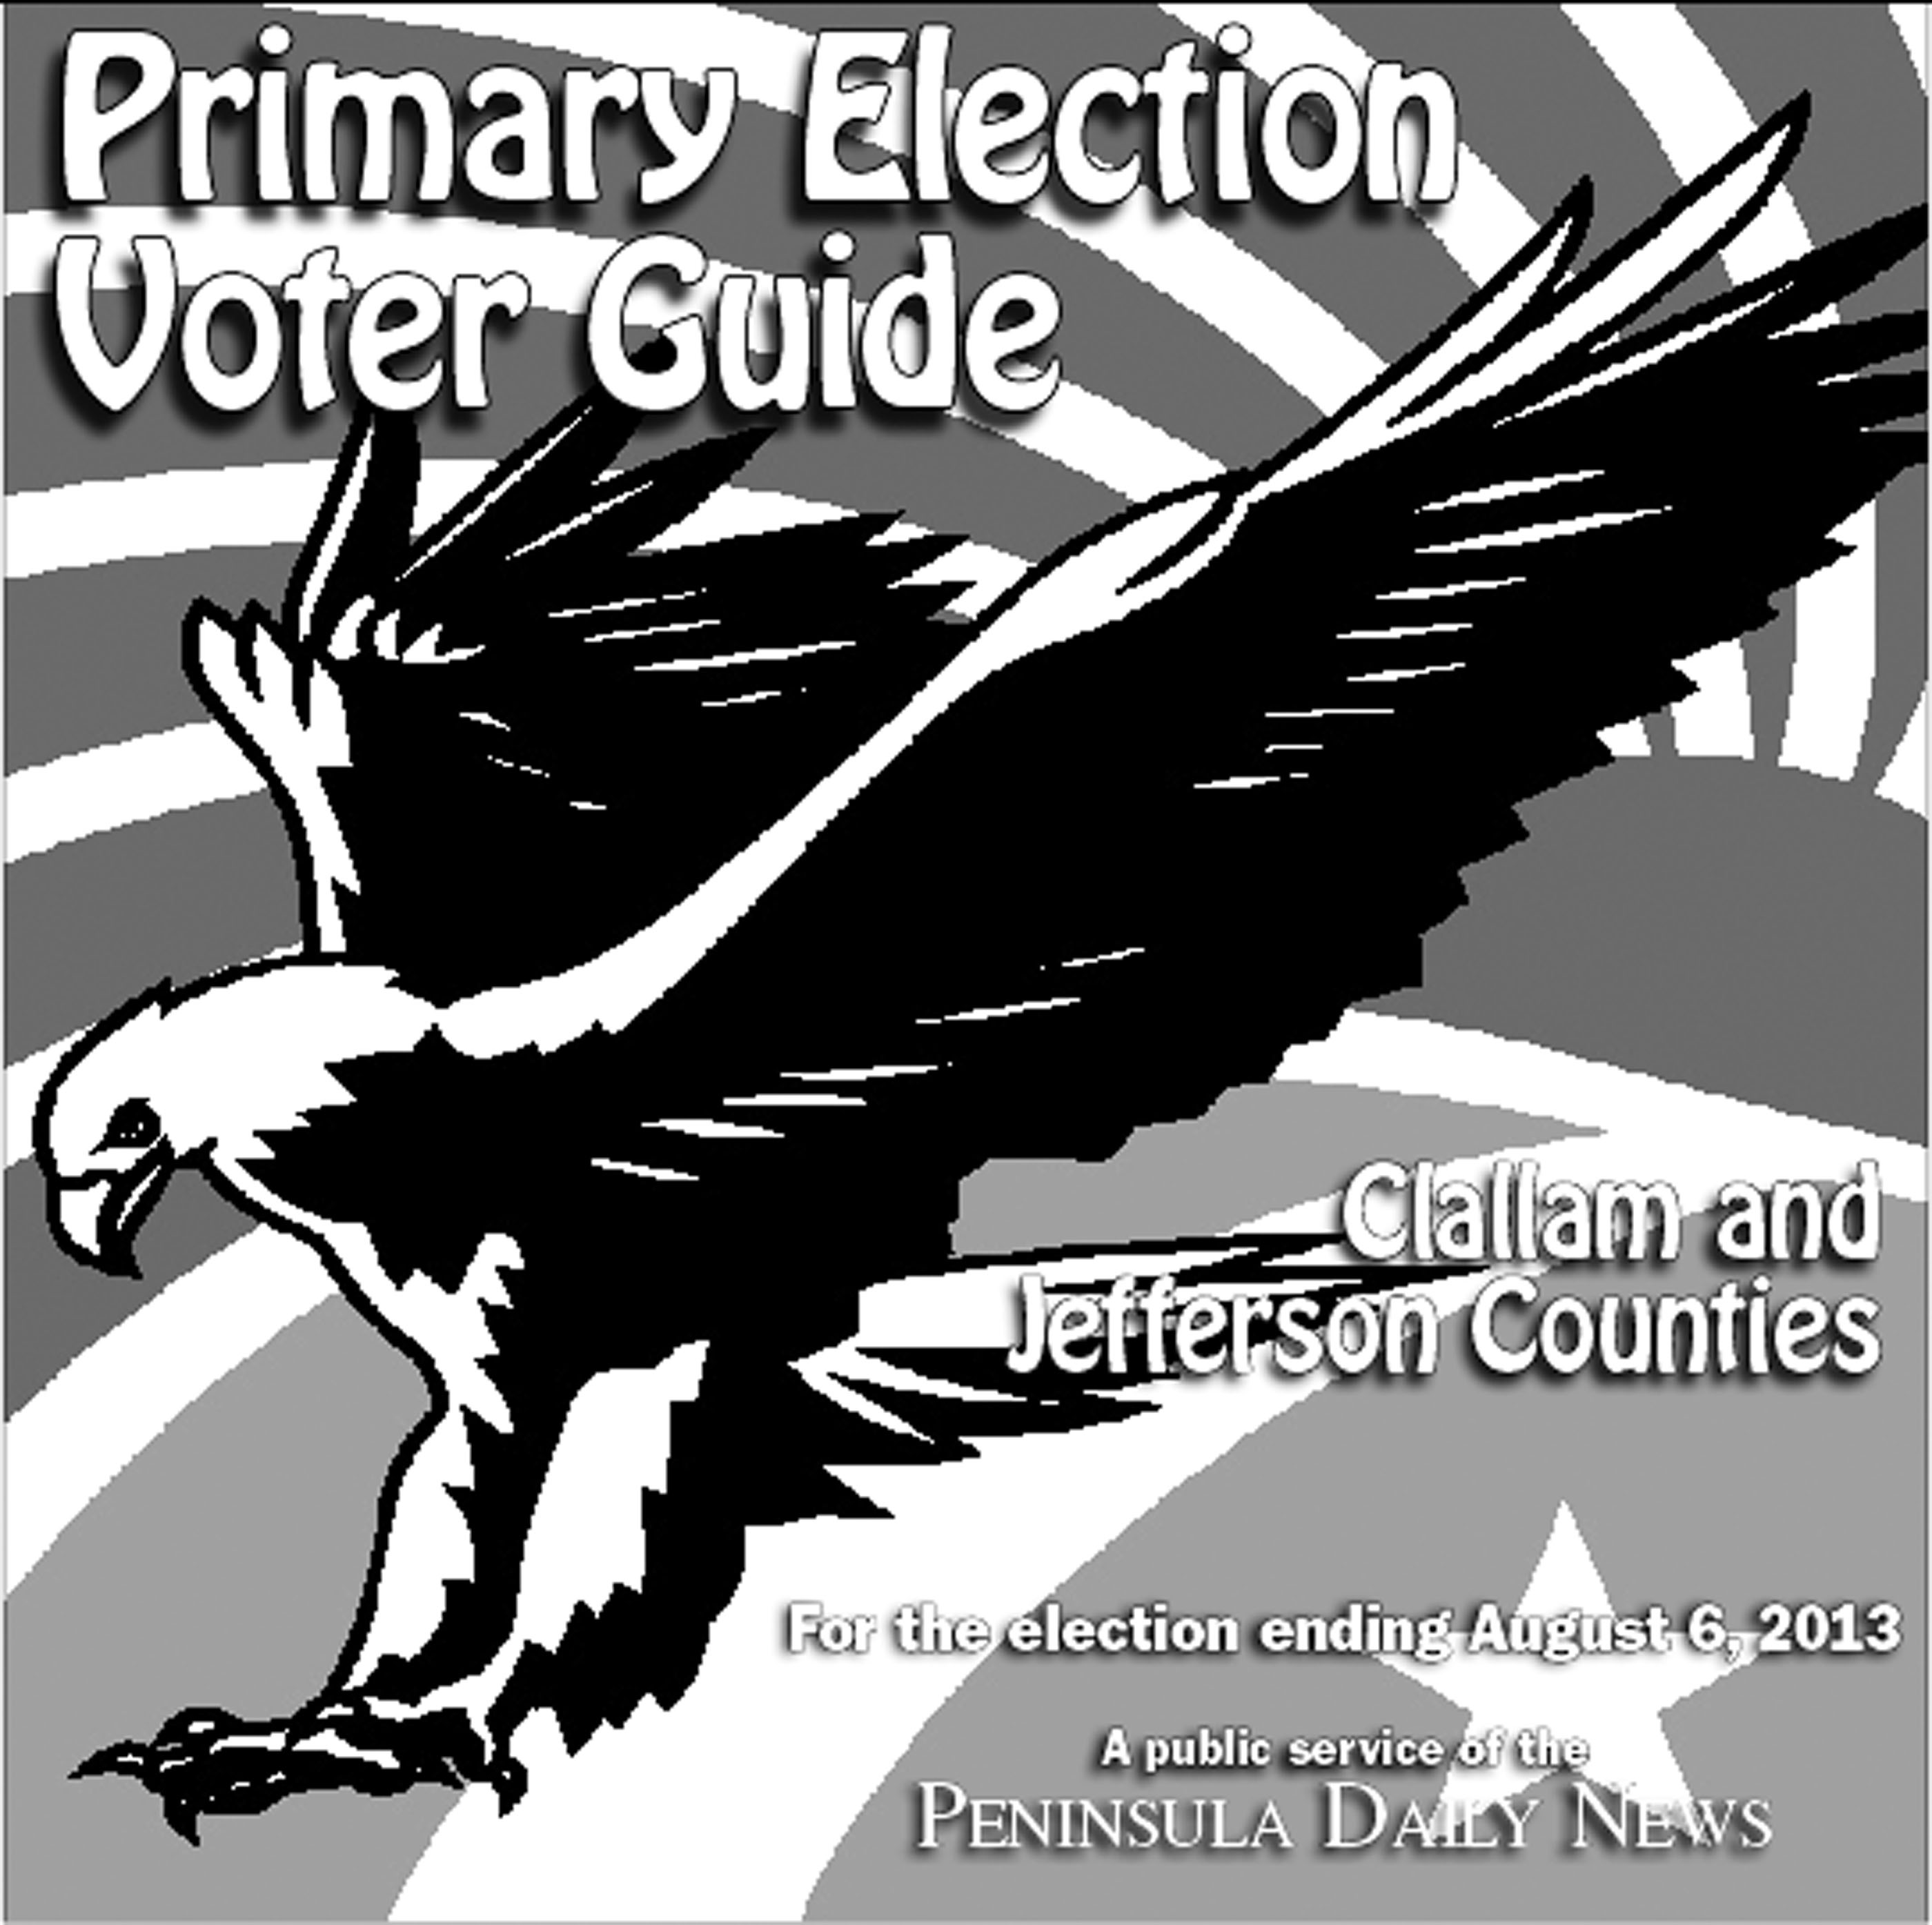 To access the voter guide